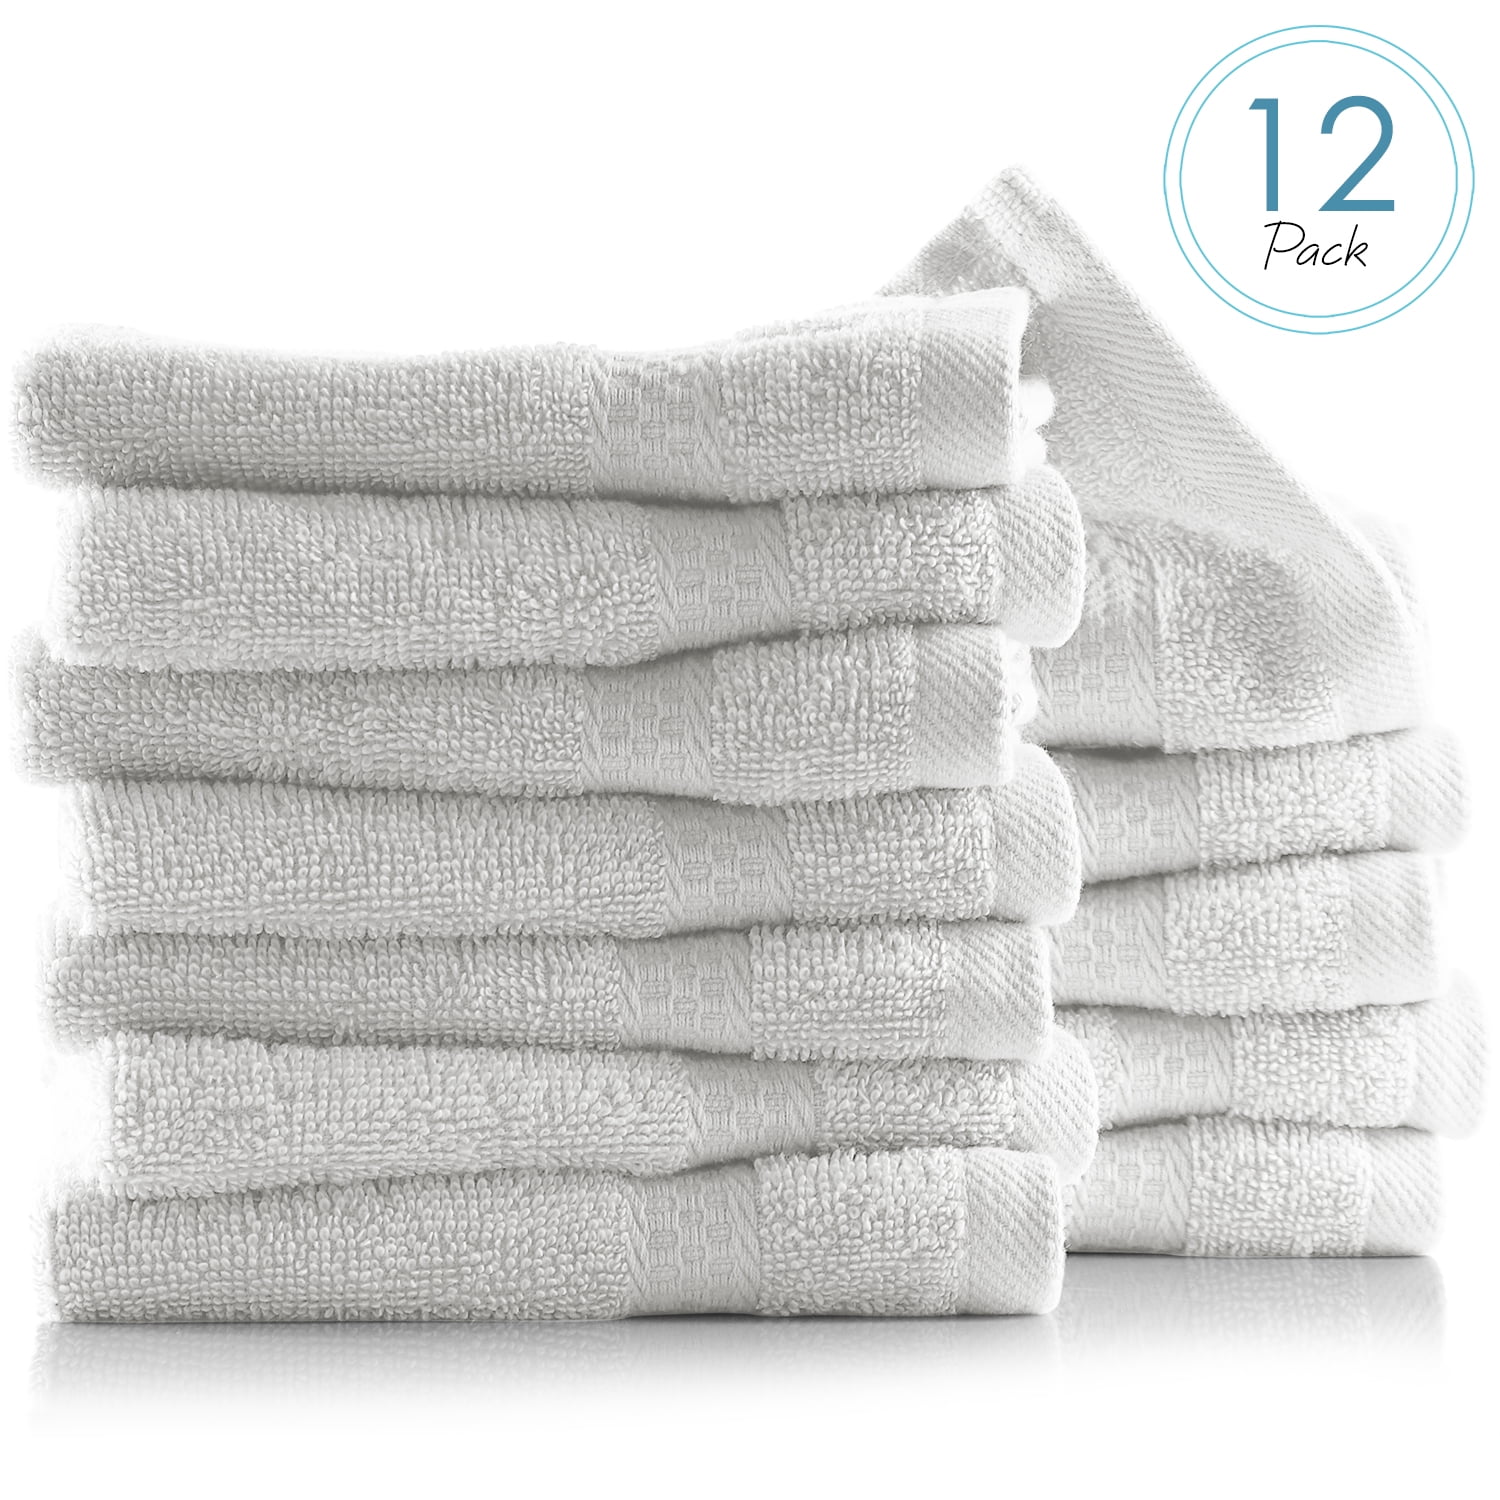 Hotel Collection Pure Cotton 500 GSM Bath Sheets White, 2 Pack Sleep&Beyond 